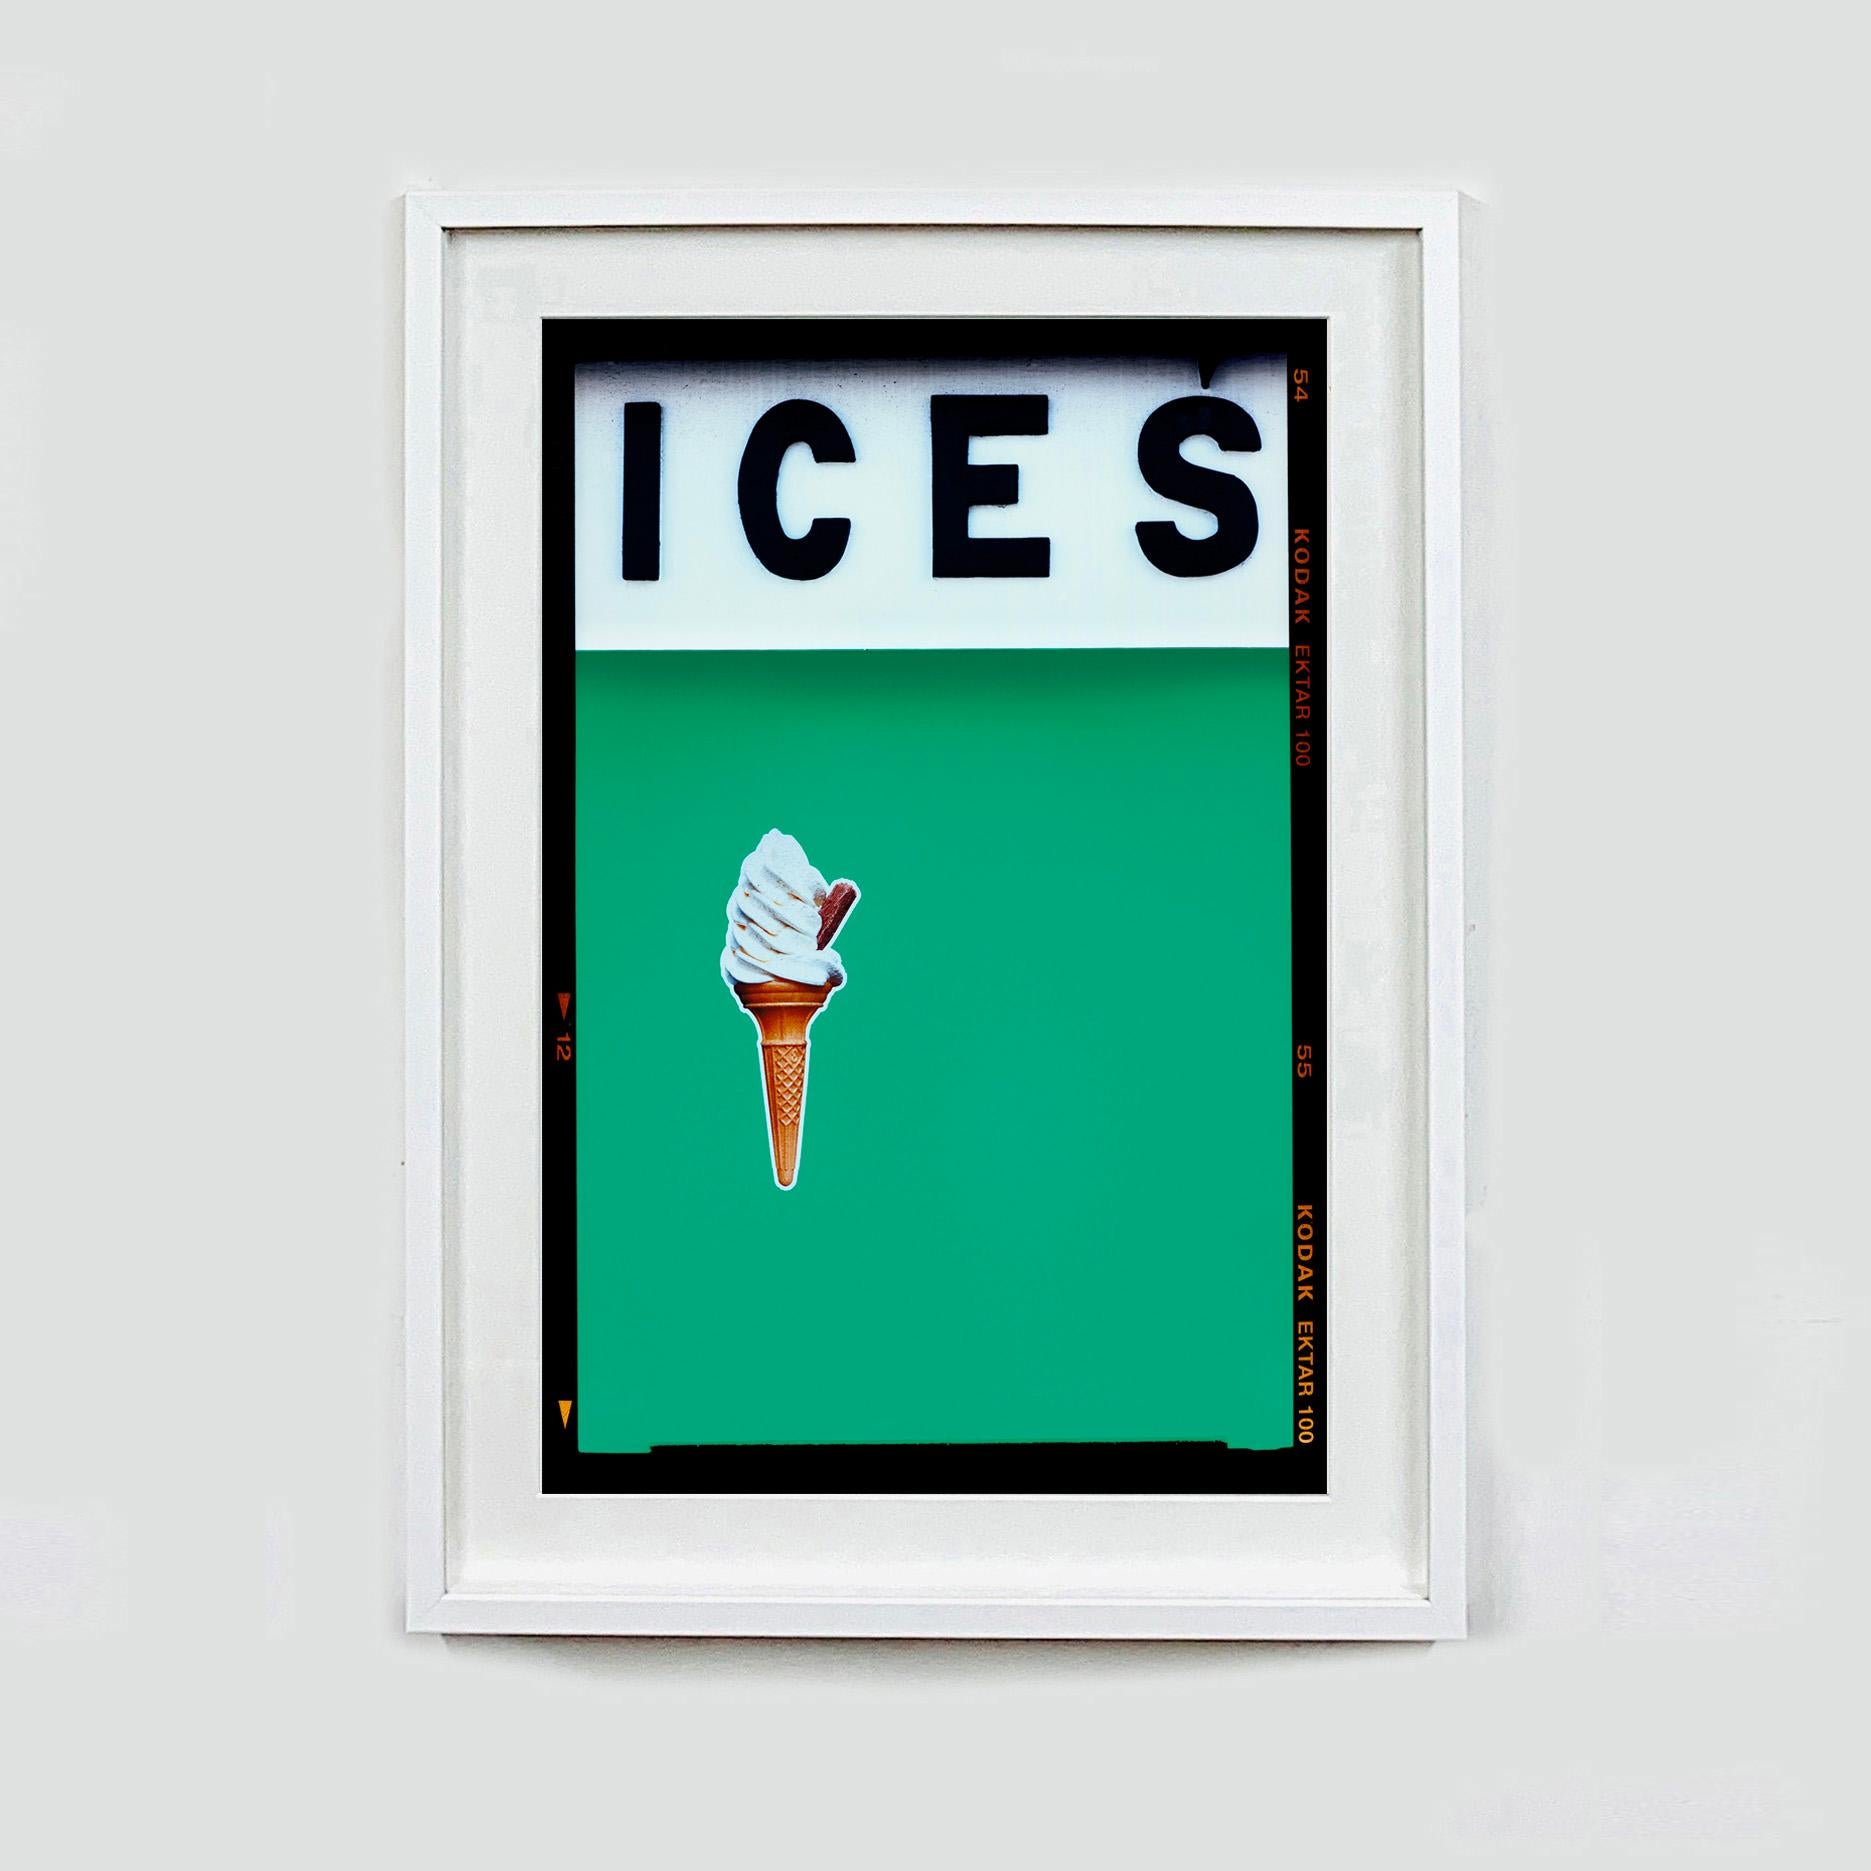 Ices (Viridian Green), Bexhill-on-Sea - British seaside color photography - Contemporary Print by Richard Heeps